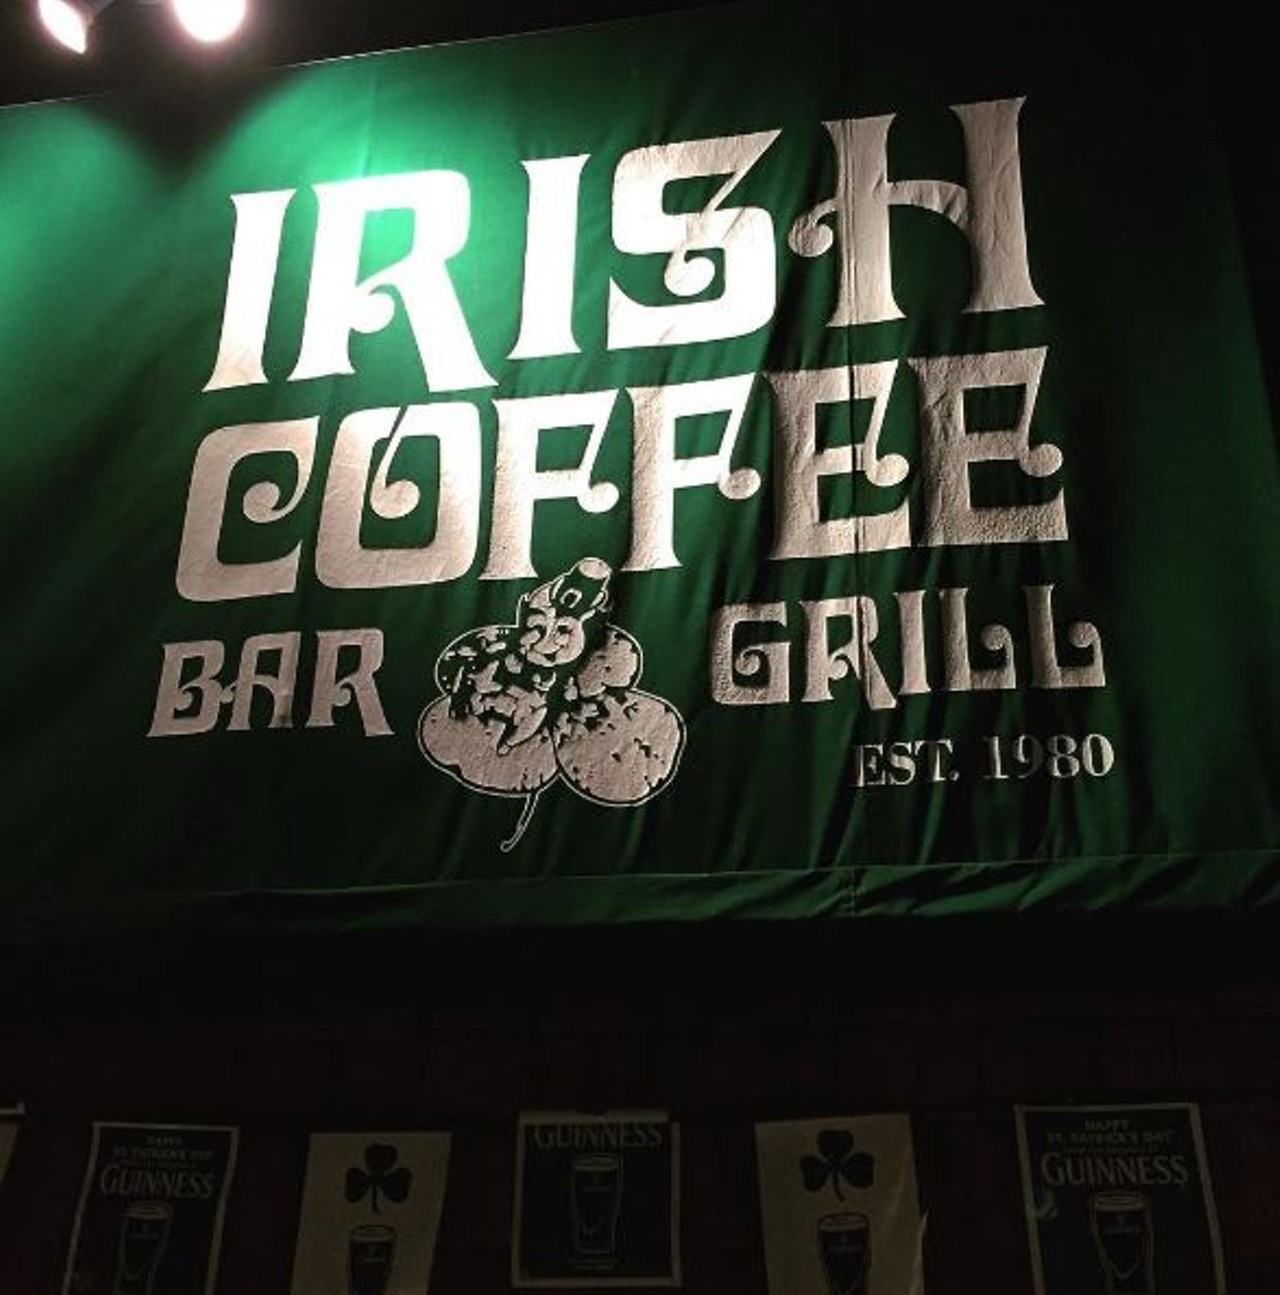 &nbsp;
Irish Coffee Bar & Grill
18666 Mack Ave, Grosse Pointe Farms
(313) 881-5675
A homey neighborhood pub, Irish Coffee Bar & Grill is the place to go for burgers, beers and great service. The high quality and affordable food make this a must try in Grosse Pointe.
photo via IG user @939theriver